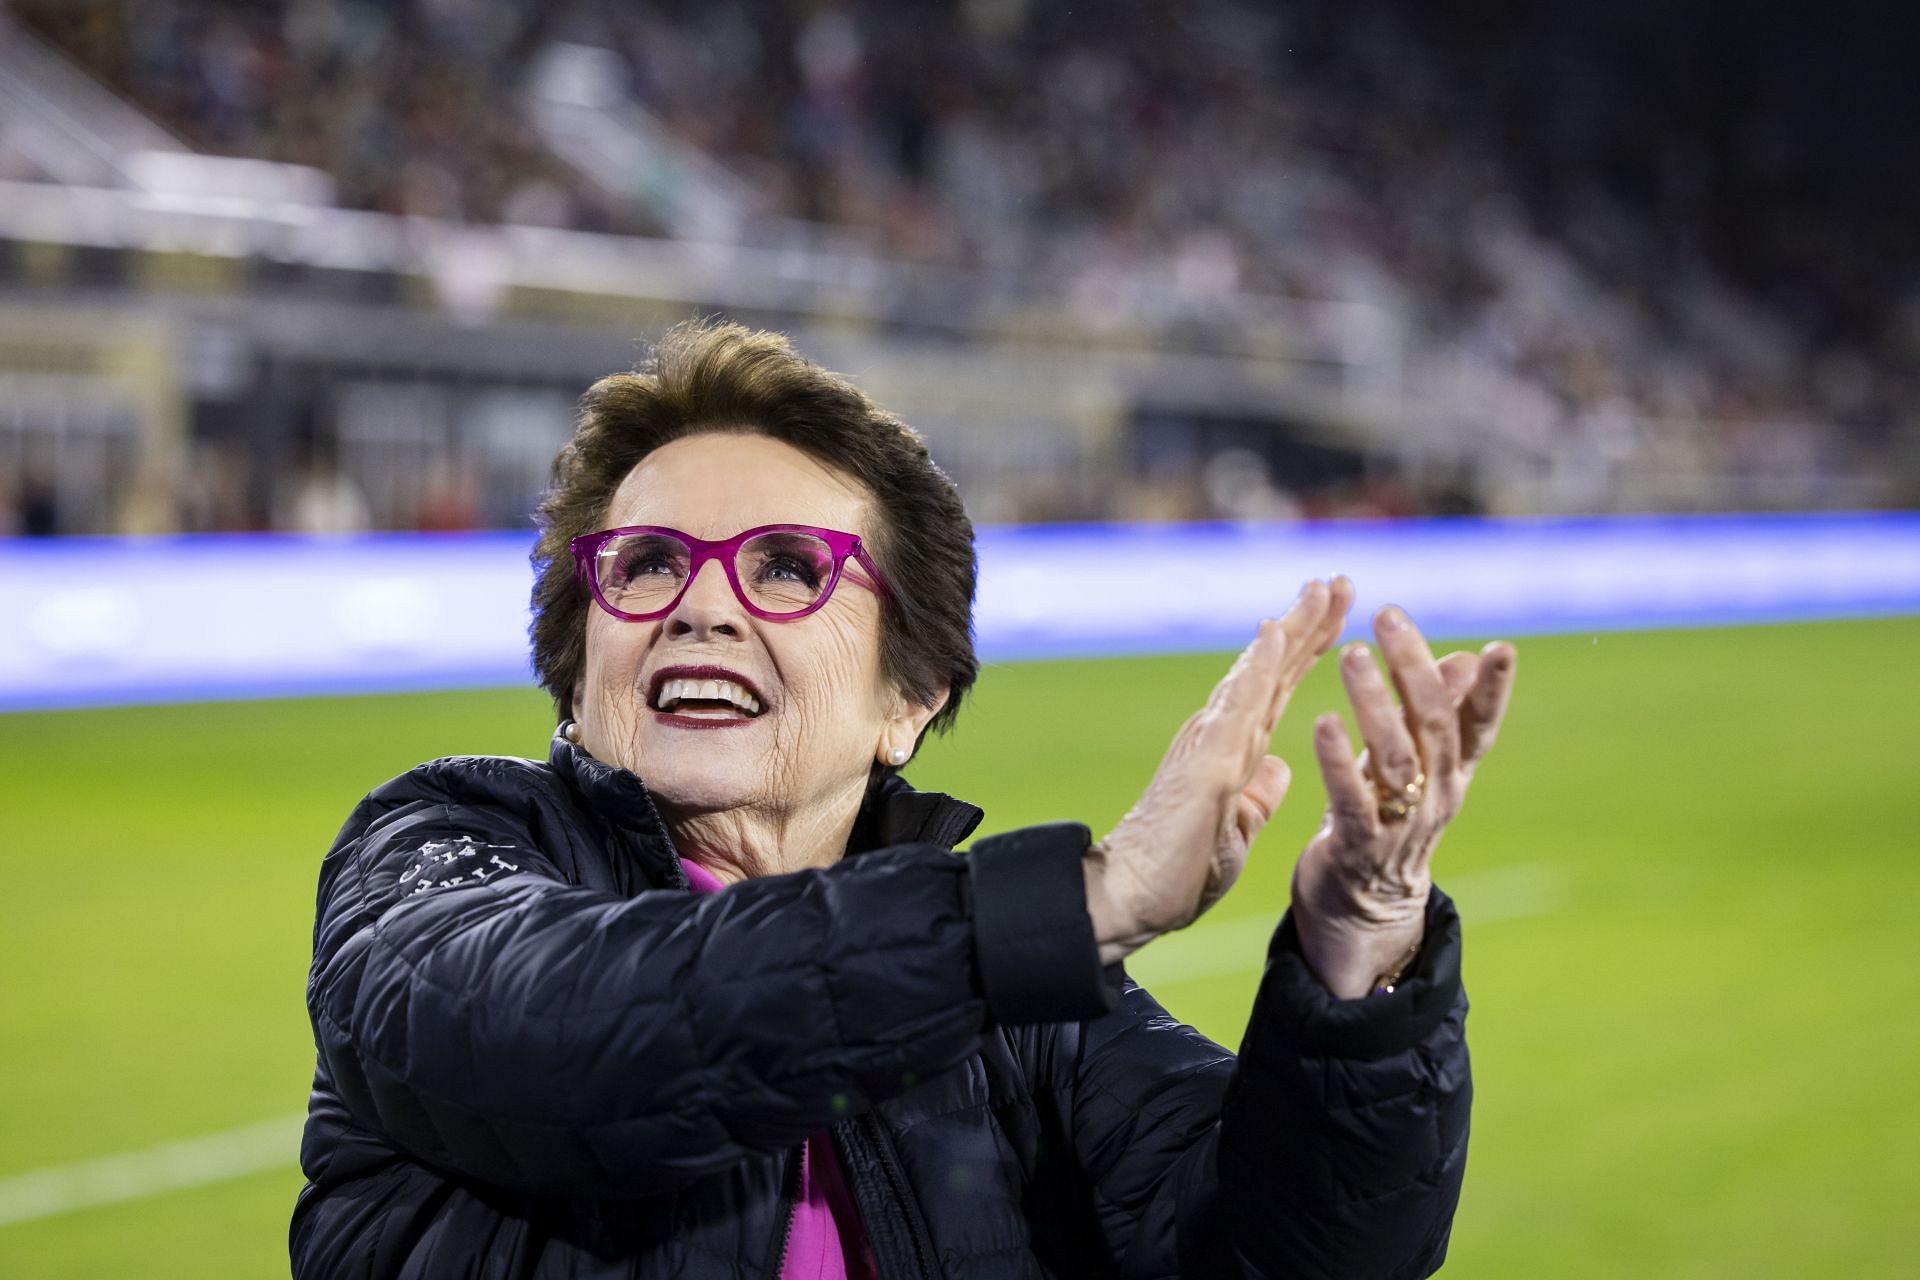 Billie Jean King is a 39-time Grand Slam winner across singles and doubles.